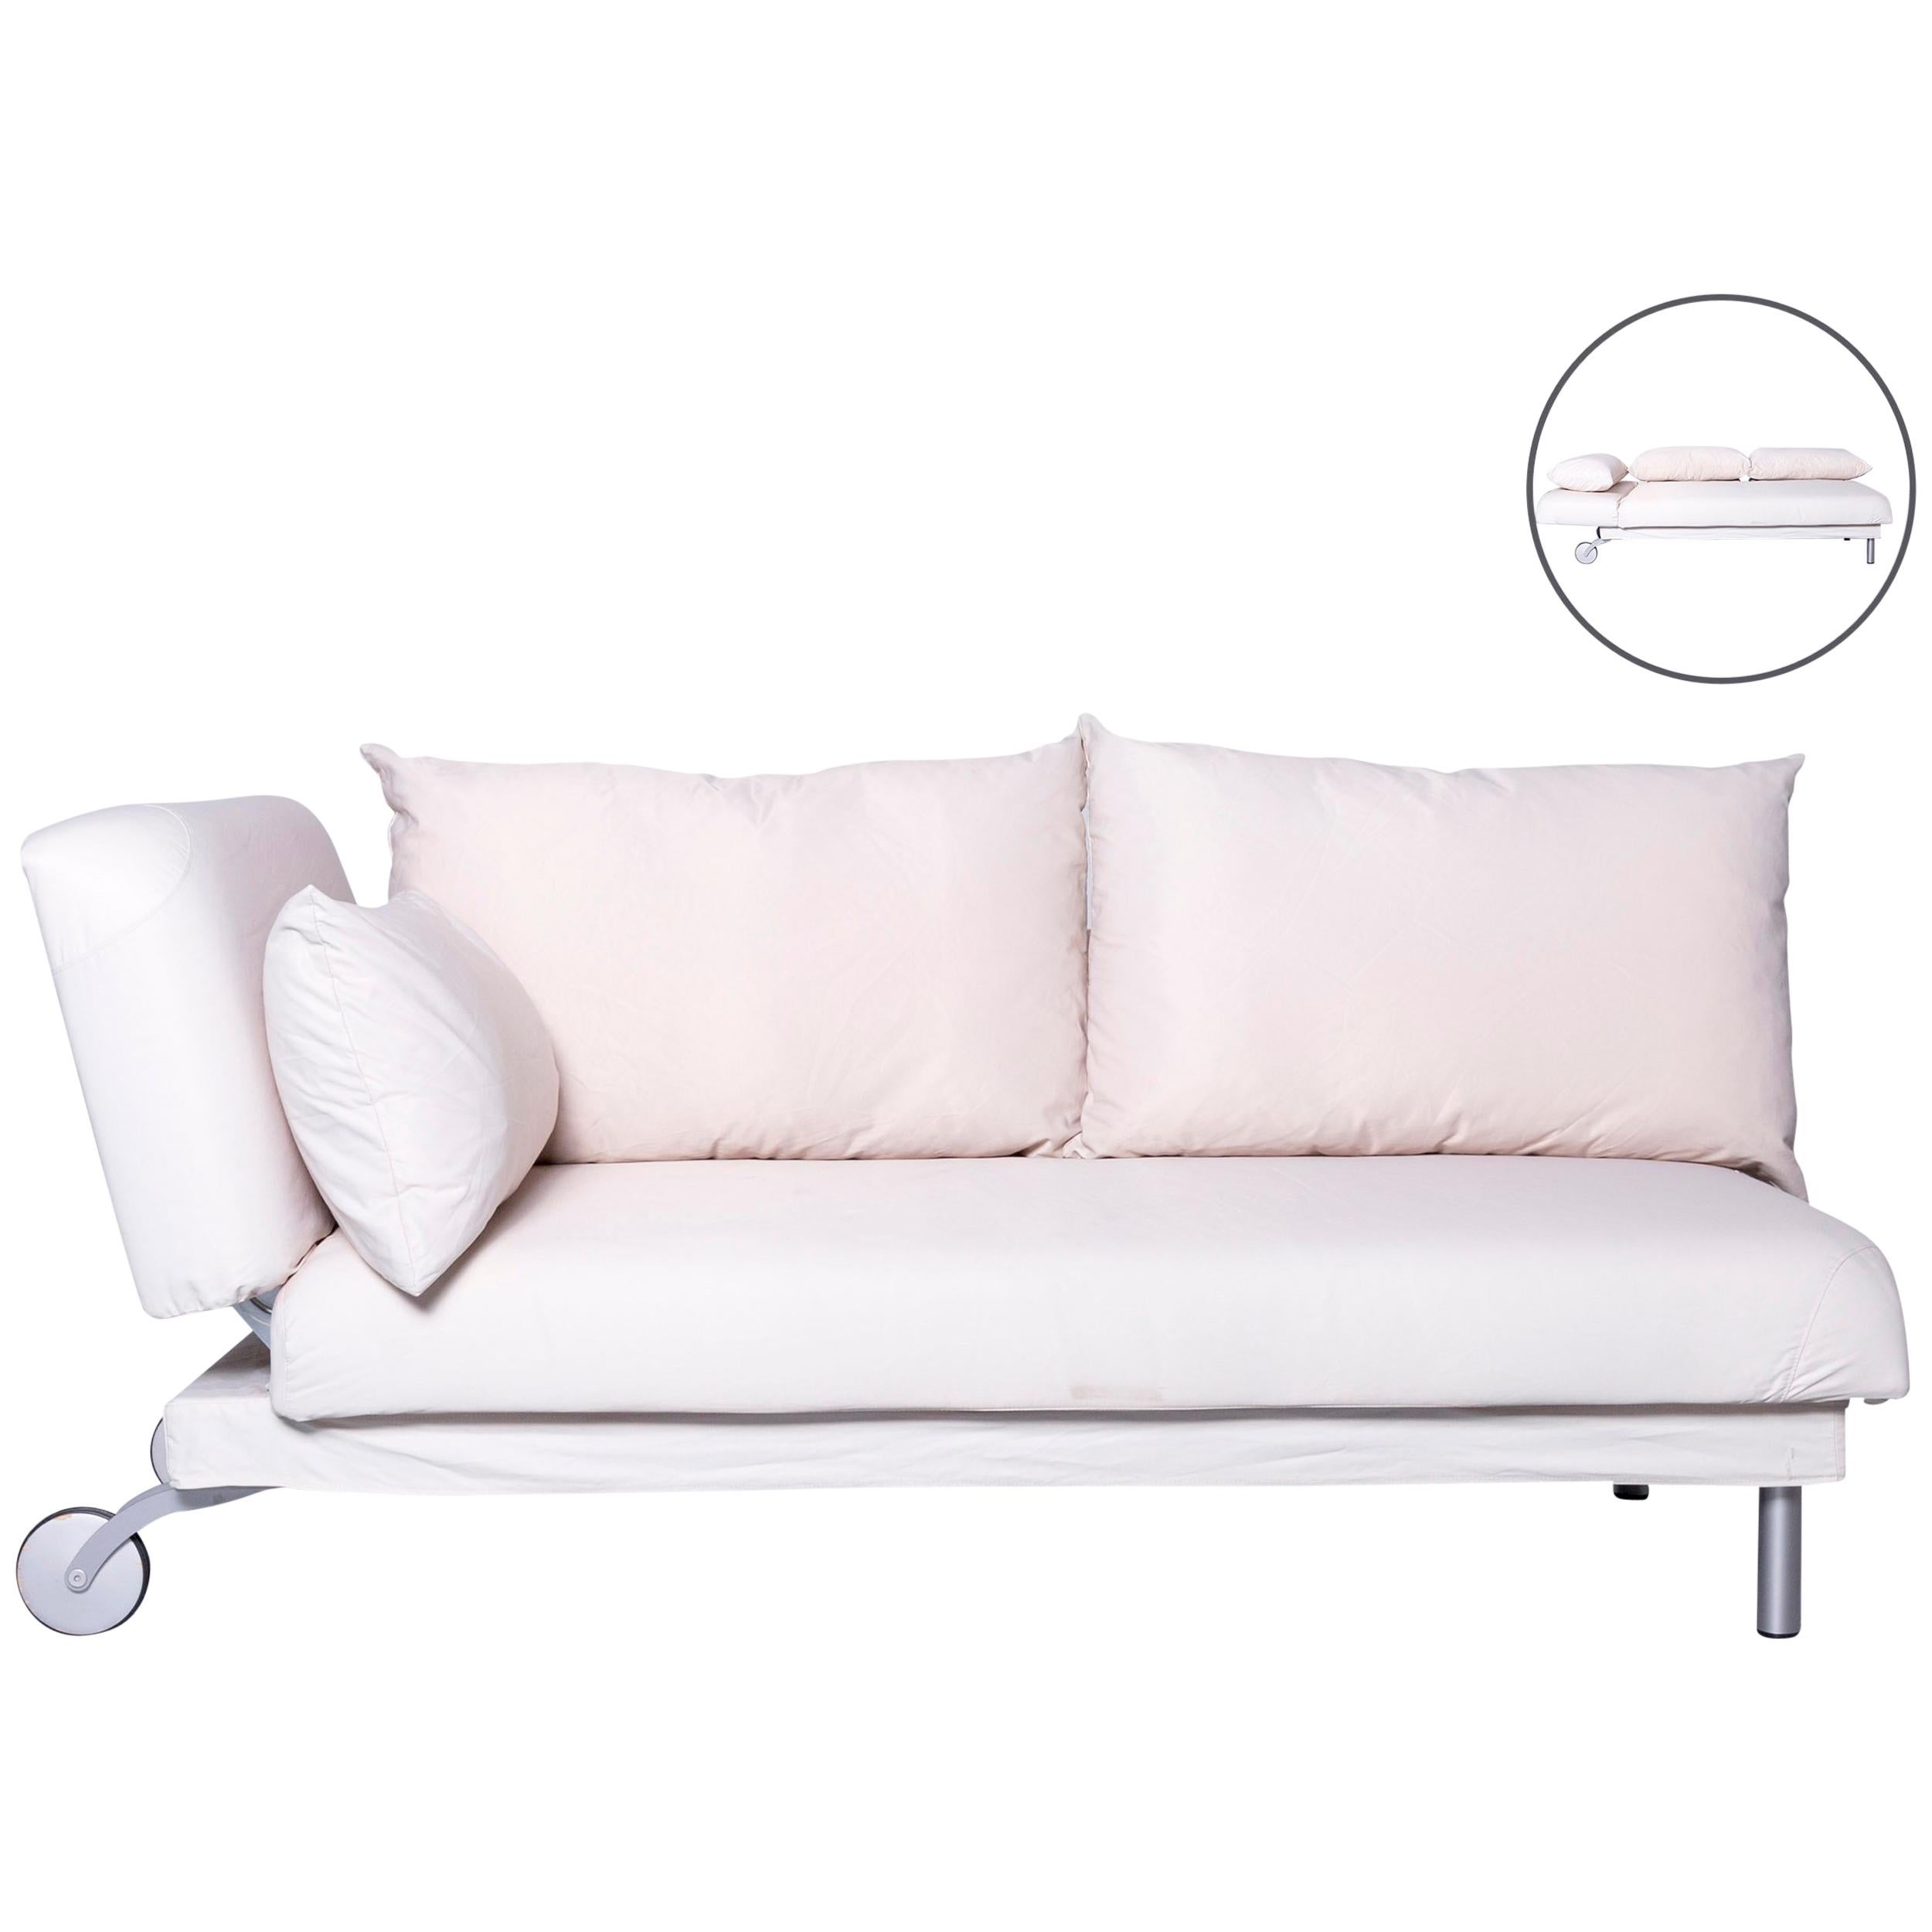 Brühl & Sippold Four-Two Designer Sofa White Fabric with Function